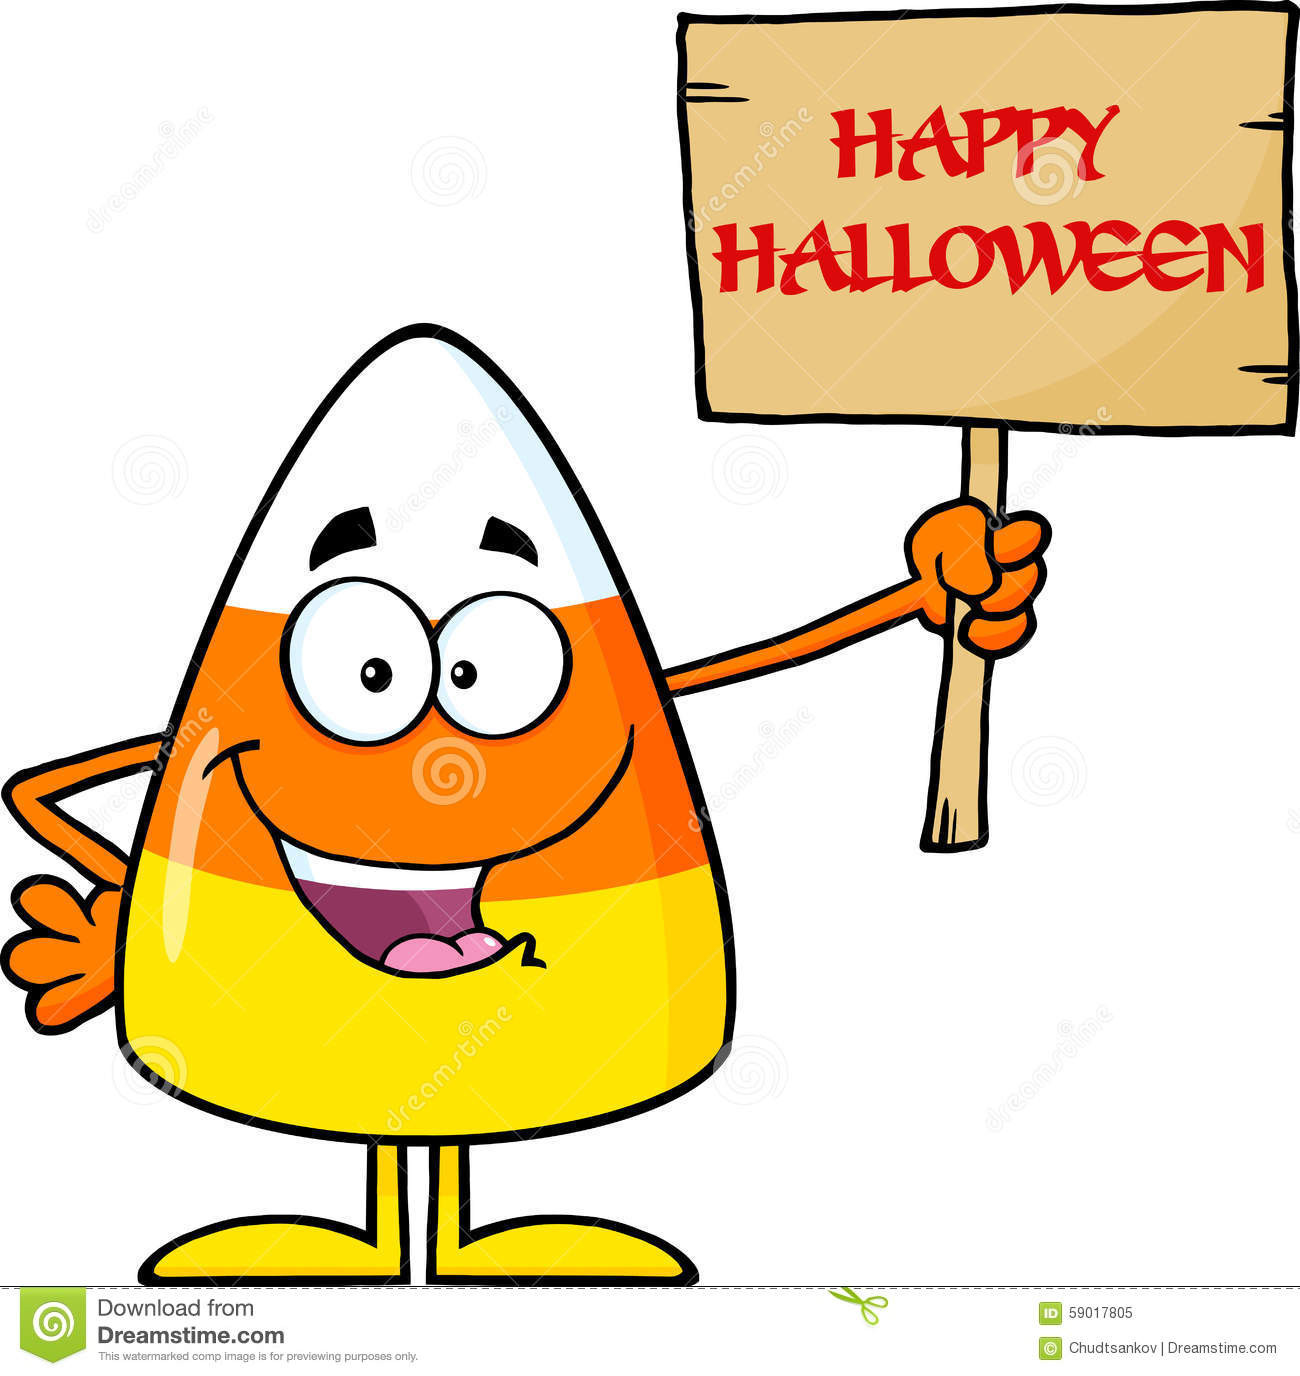 Candy Corn Cartoon
 Funny Candy Corn Holding A Wooden Board With Text Stock